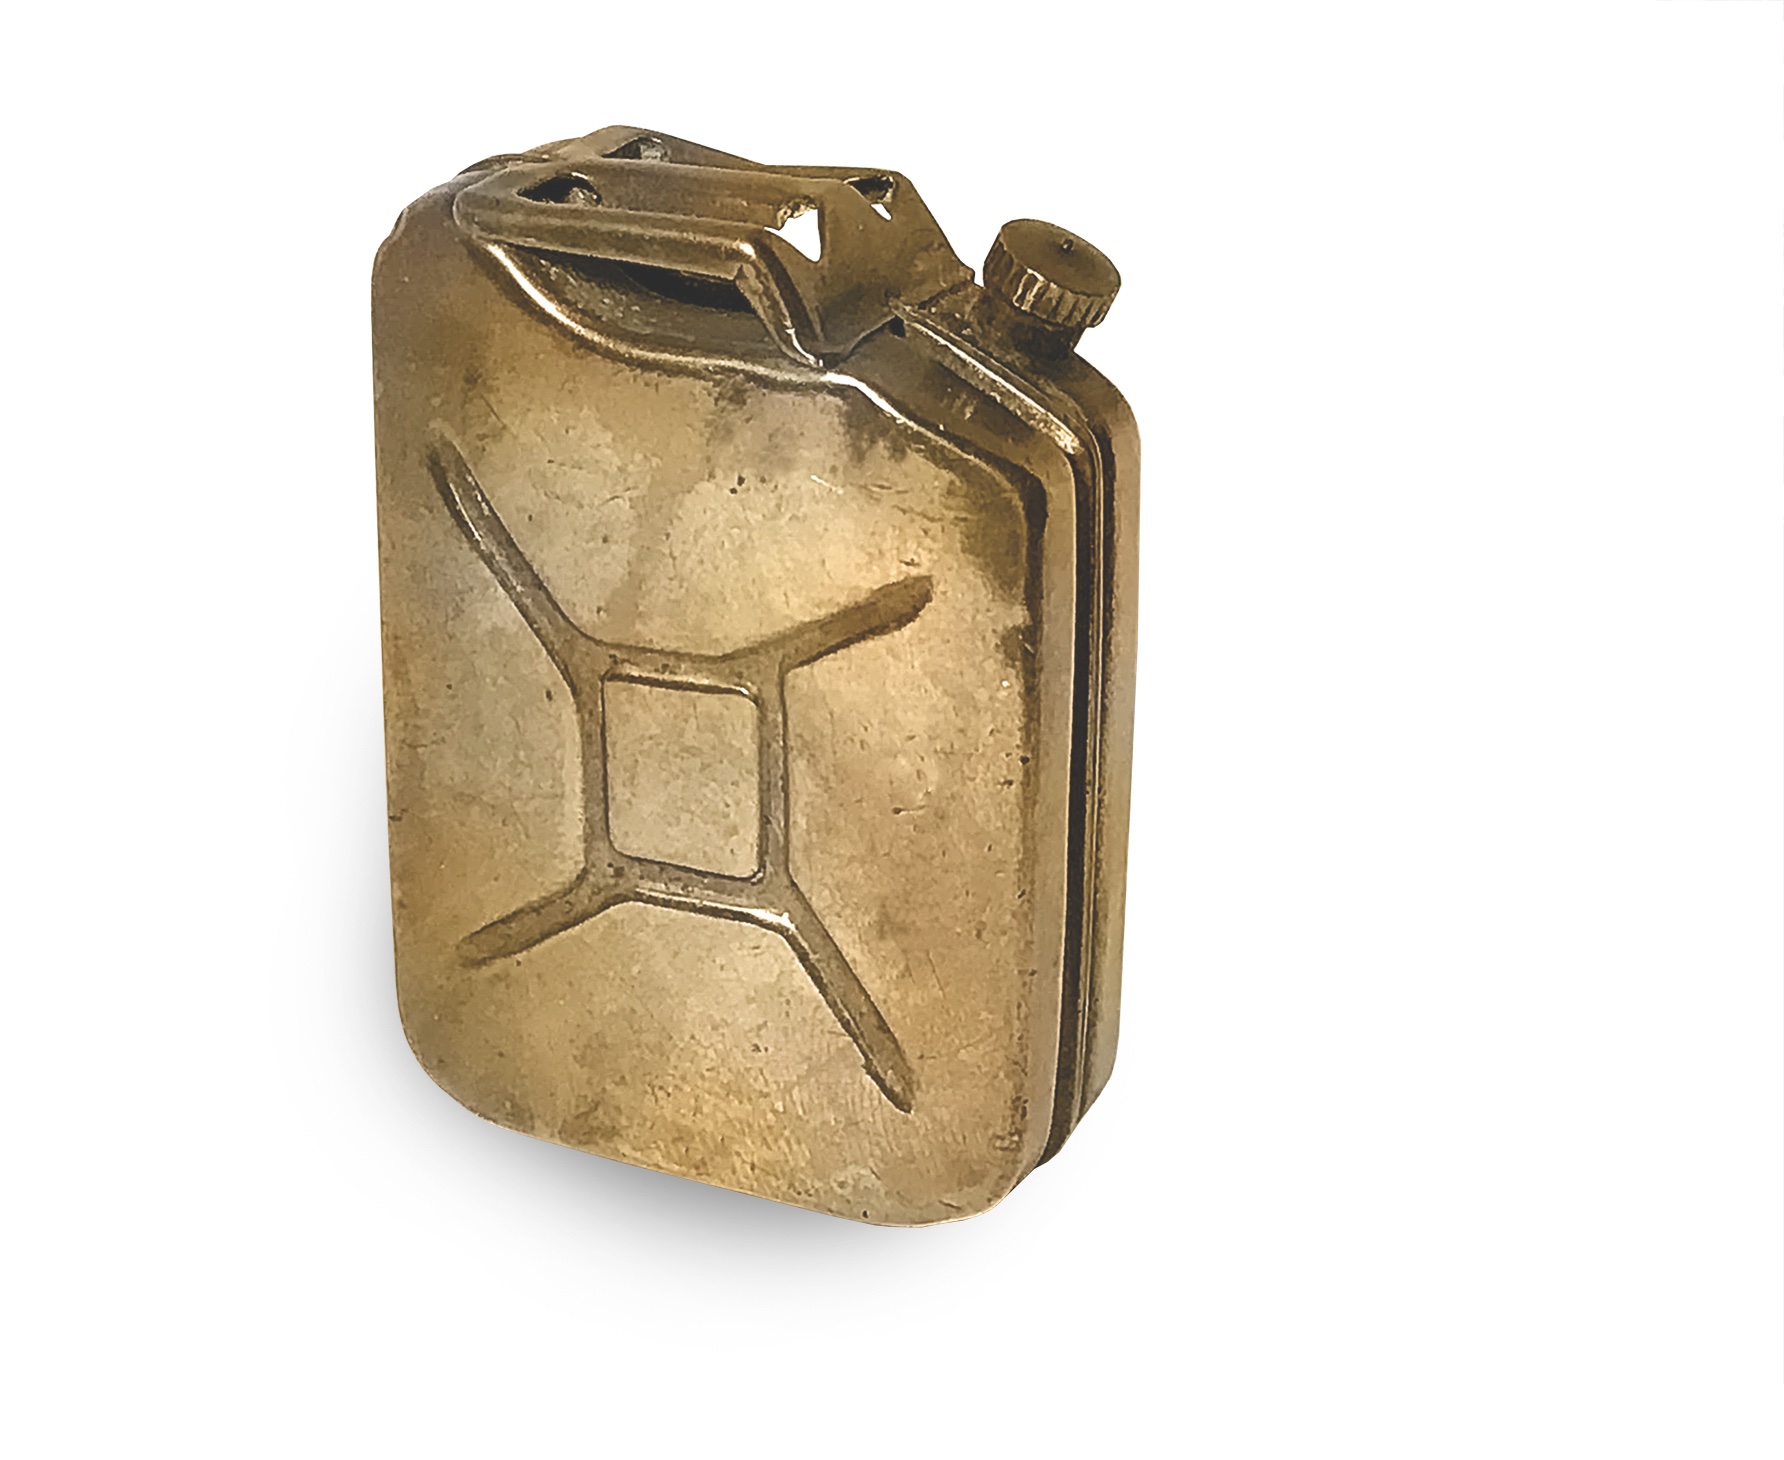 “My Jerrycan”: A Glamorous Wartime Souvenir, Packaged in a Decidedly Unglamorous Way